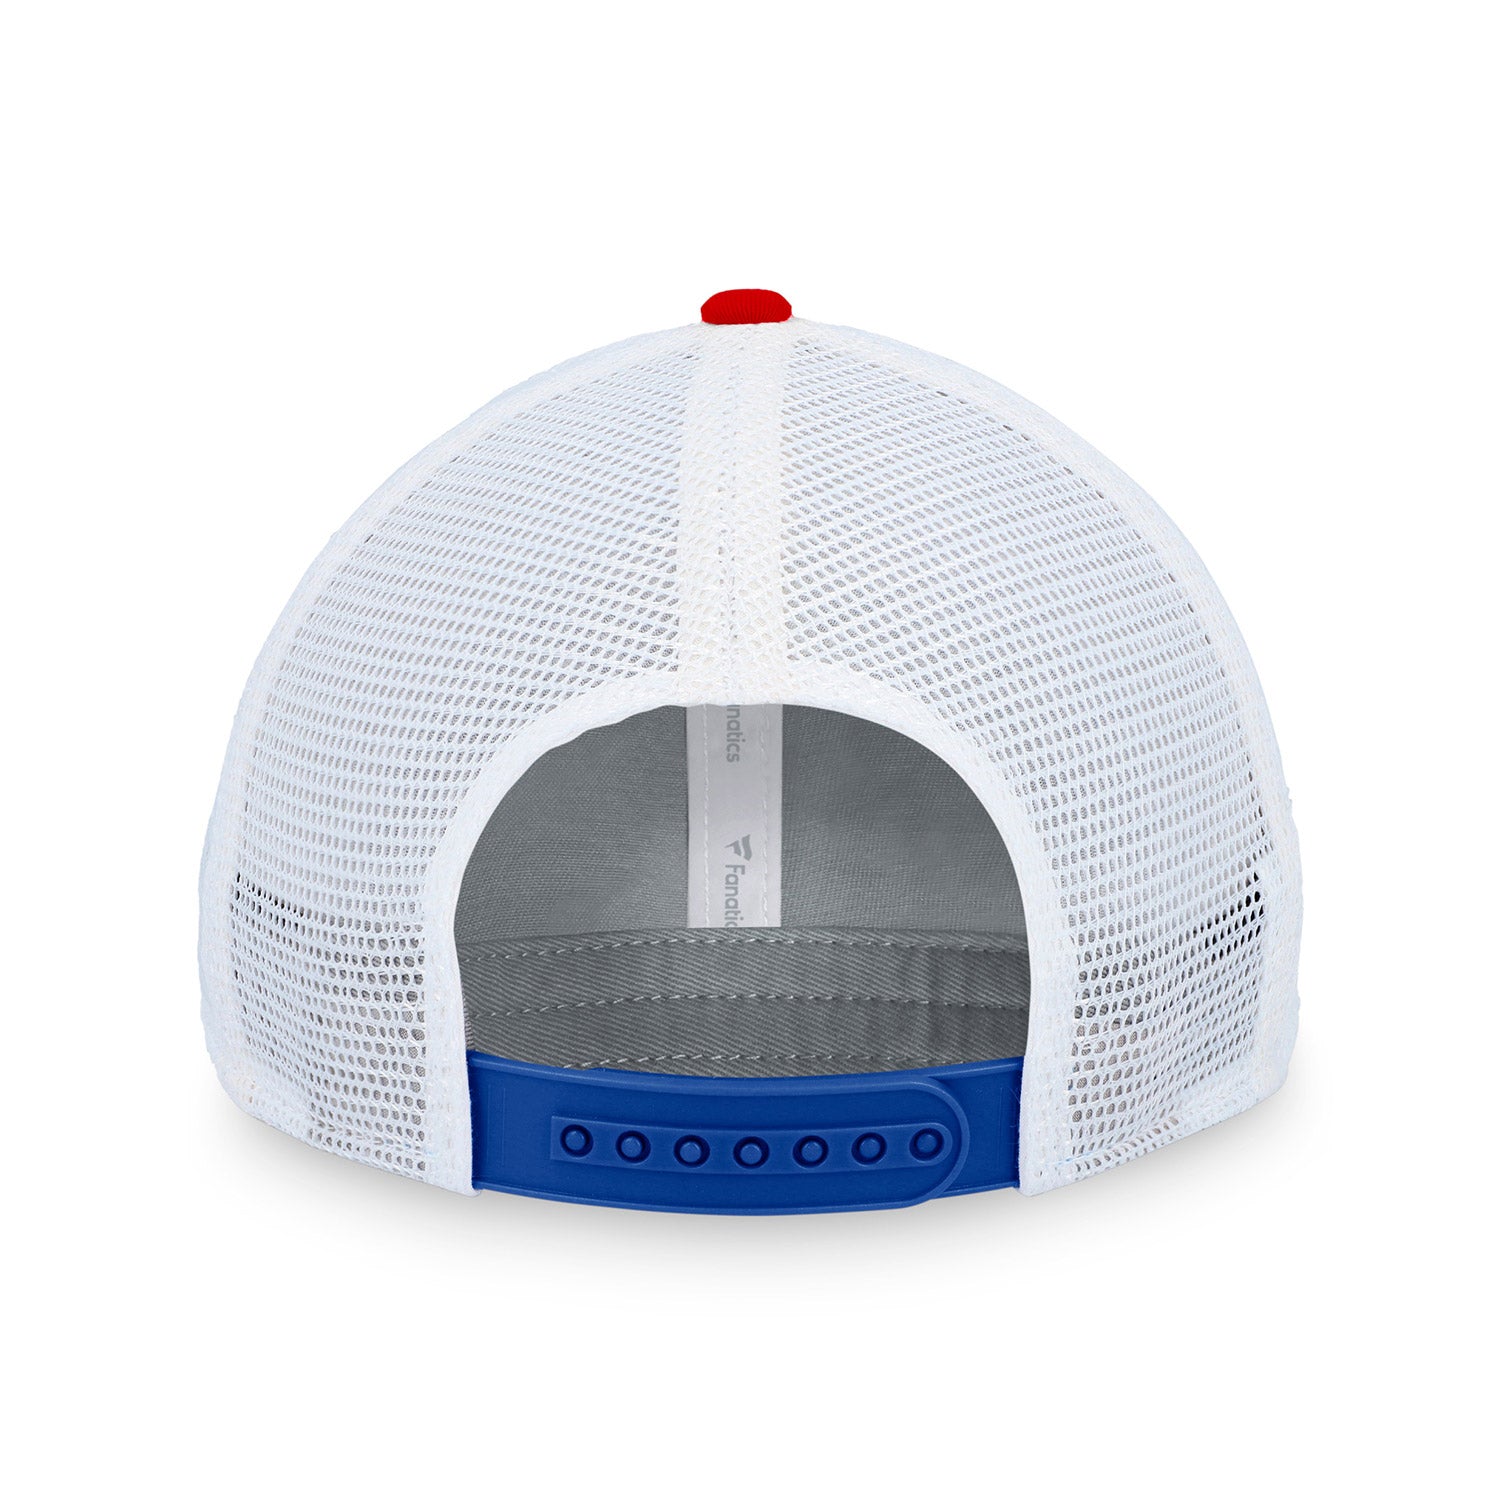 Fanatics Rangers Iconic Gradiant Trucker Hat In Blue, White & Red - Back View